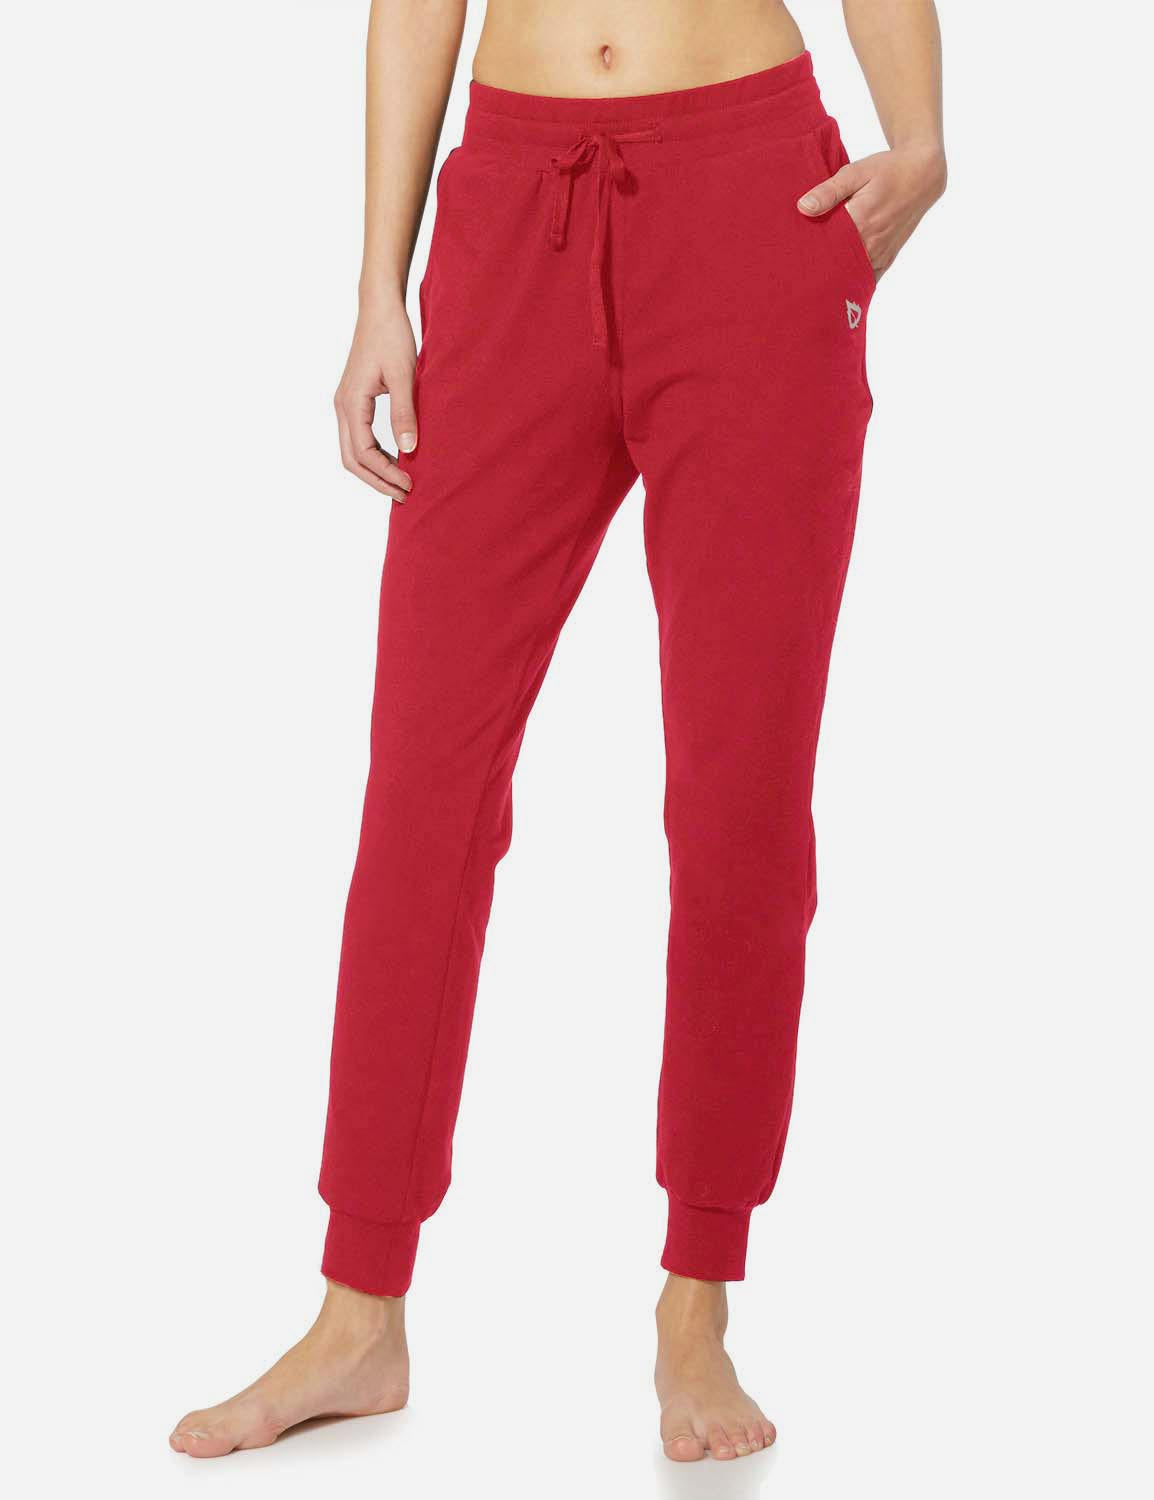 Baleaf Women's Cotton Comfy Pocketed & Tapered Weekend Joggers abh103 Rose Red Side